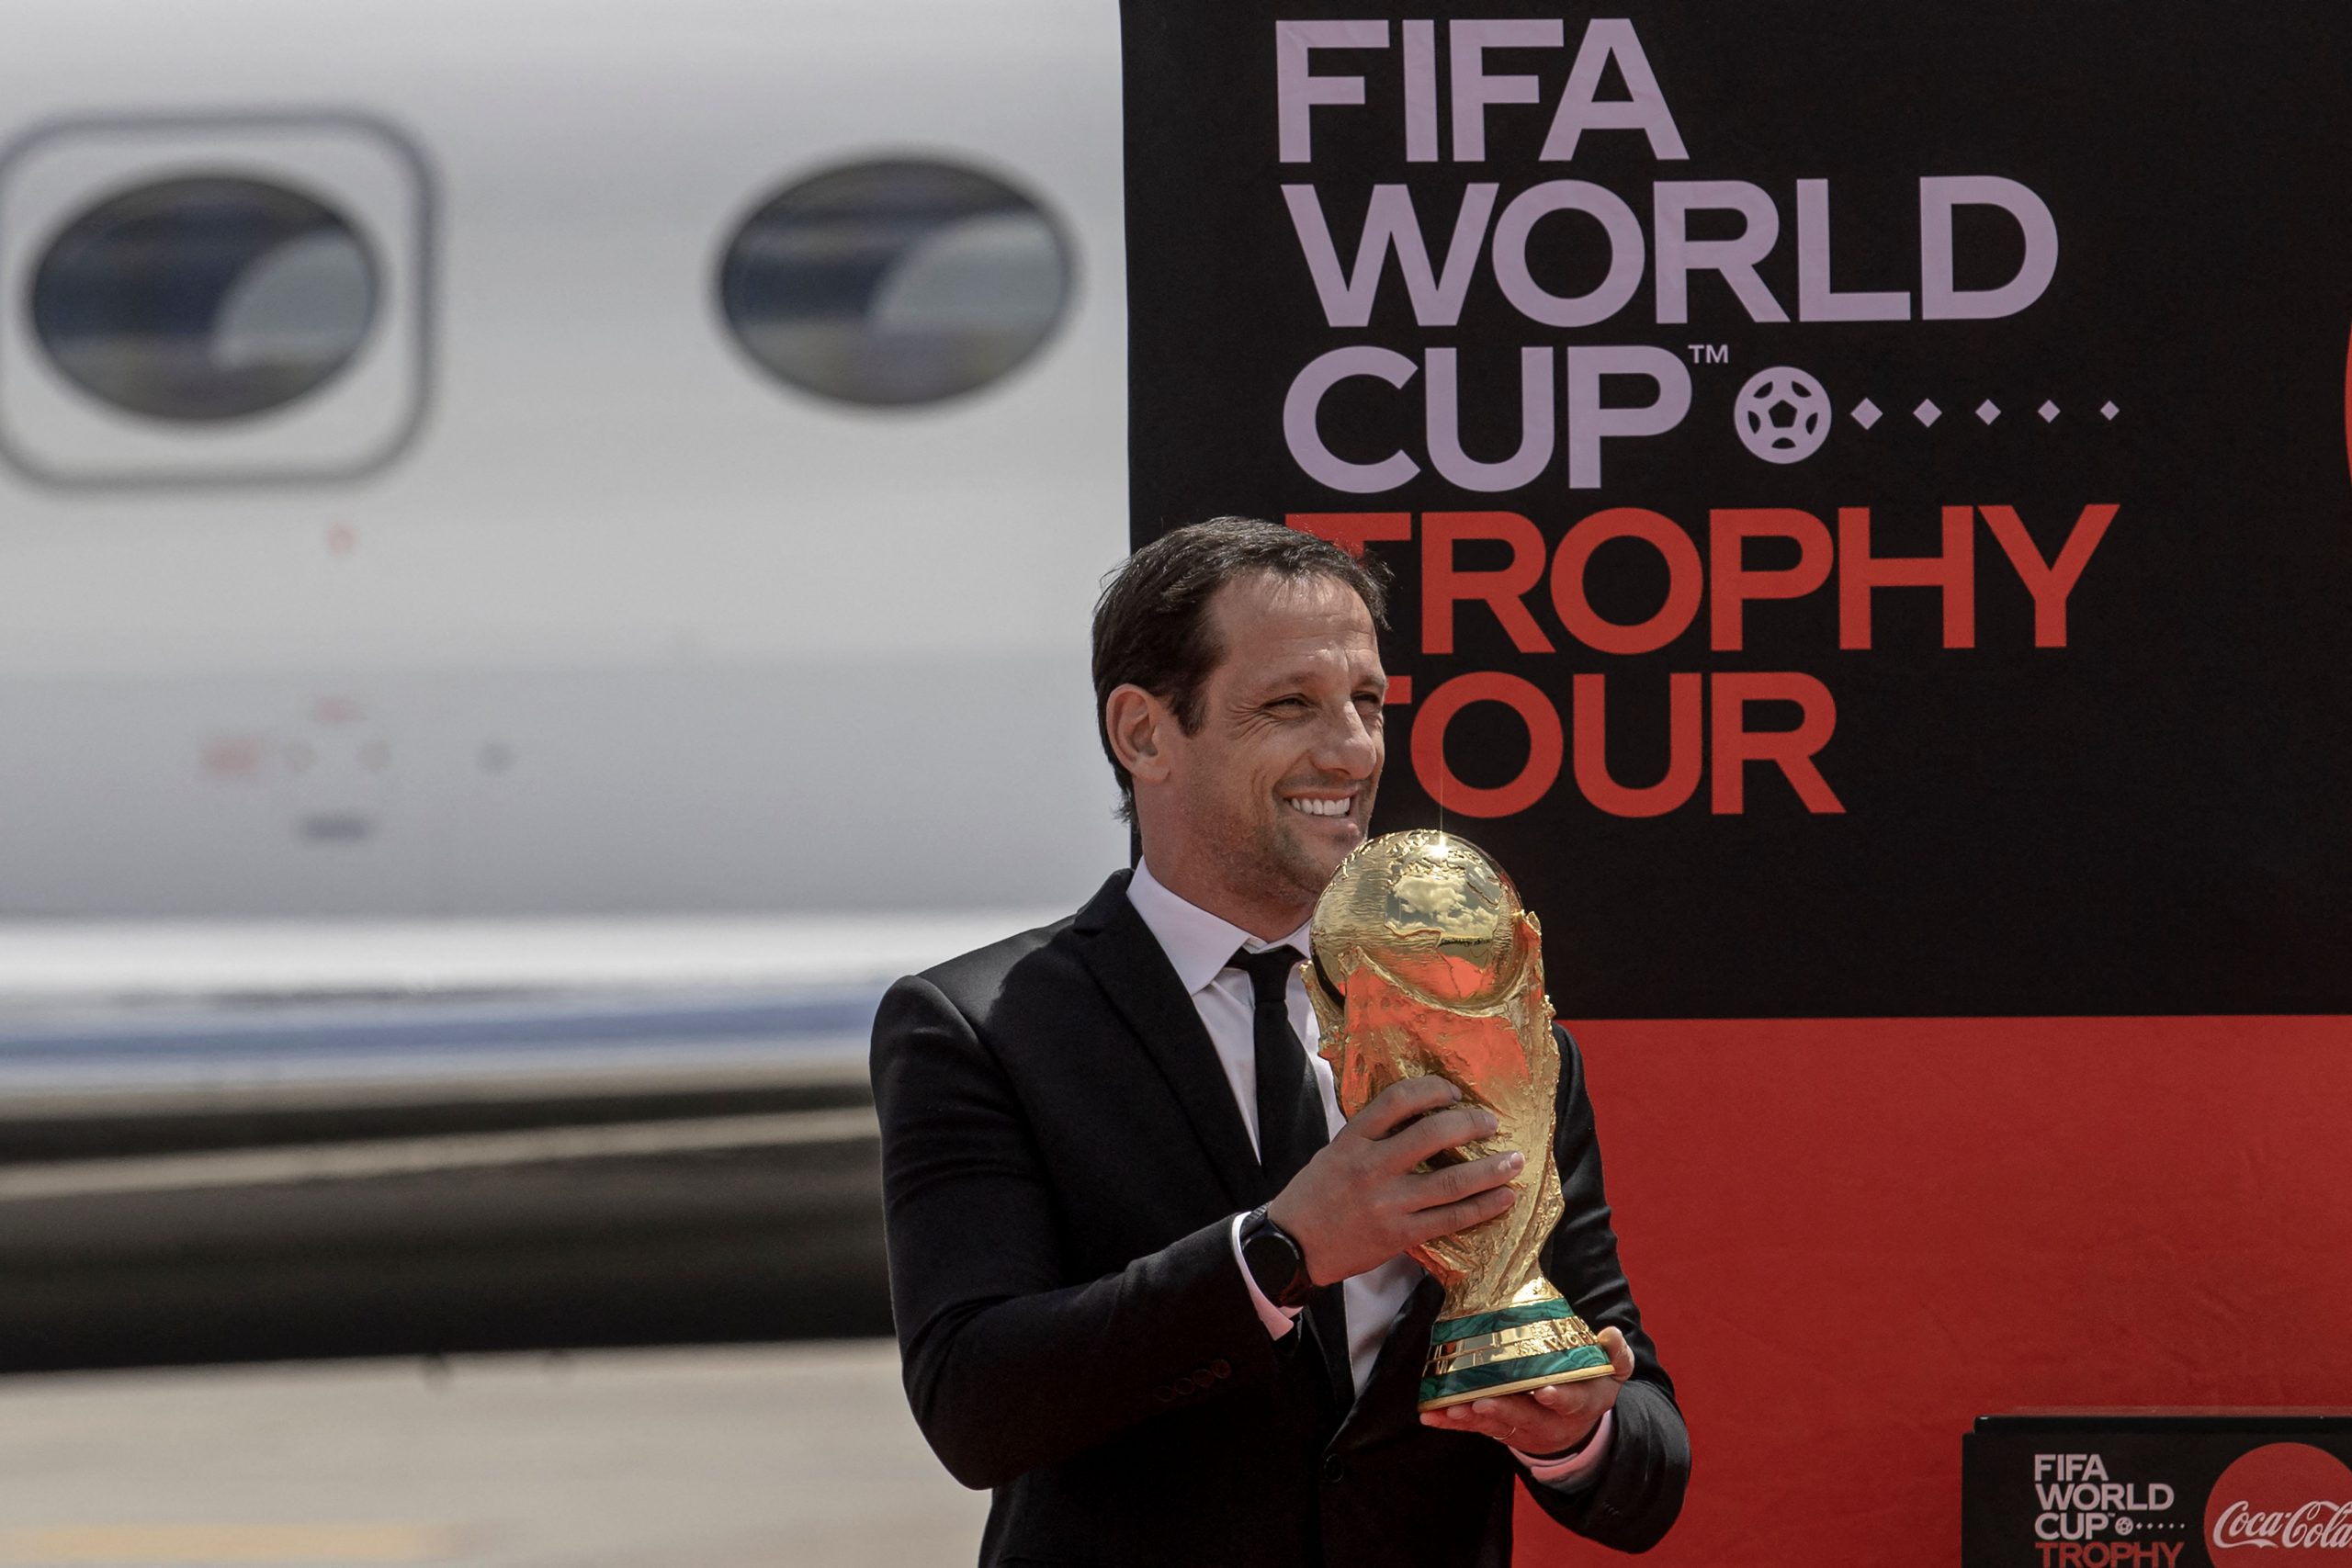 Brazilian football coach, Juliano Haus Belletti who is also a former Brazil national team player disembarks from an aircraft carrying the FIFA World Cup Trophy. (Photo by TONY KARUMBA/AFP via Getty Images)